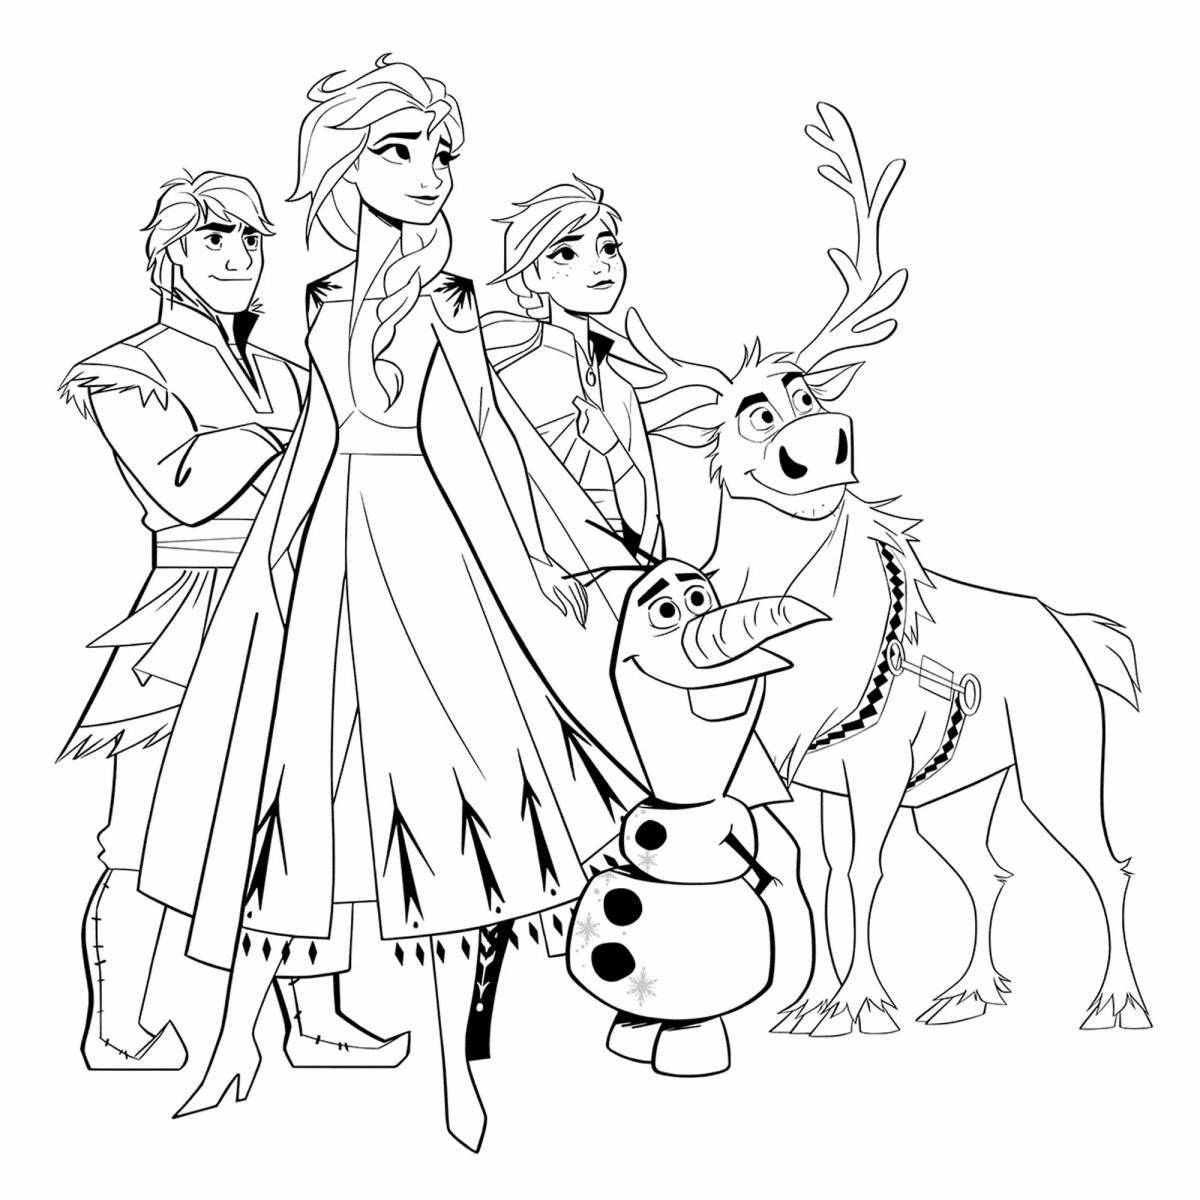 Exquisite elsa coloring book for 5-6 year olds